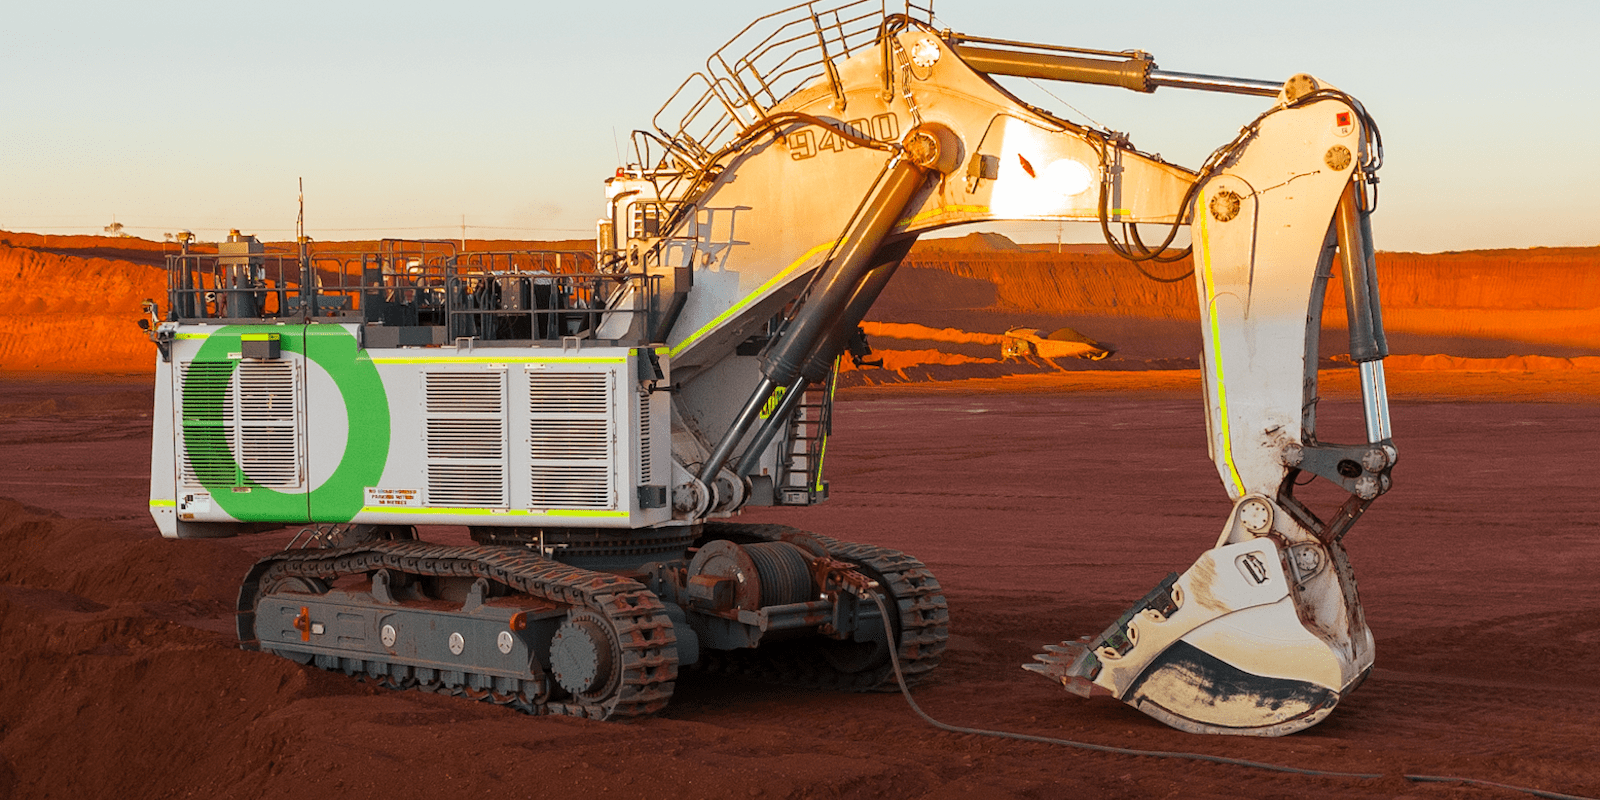 Liebherr and Fortescue repower R 9400 excavator to electric configuration